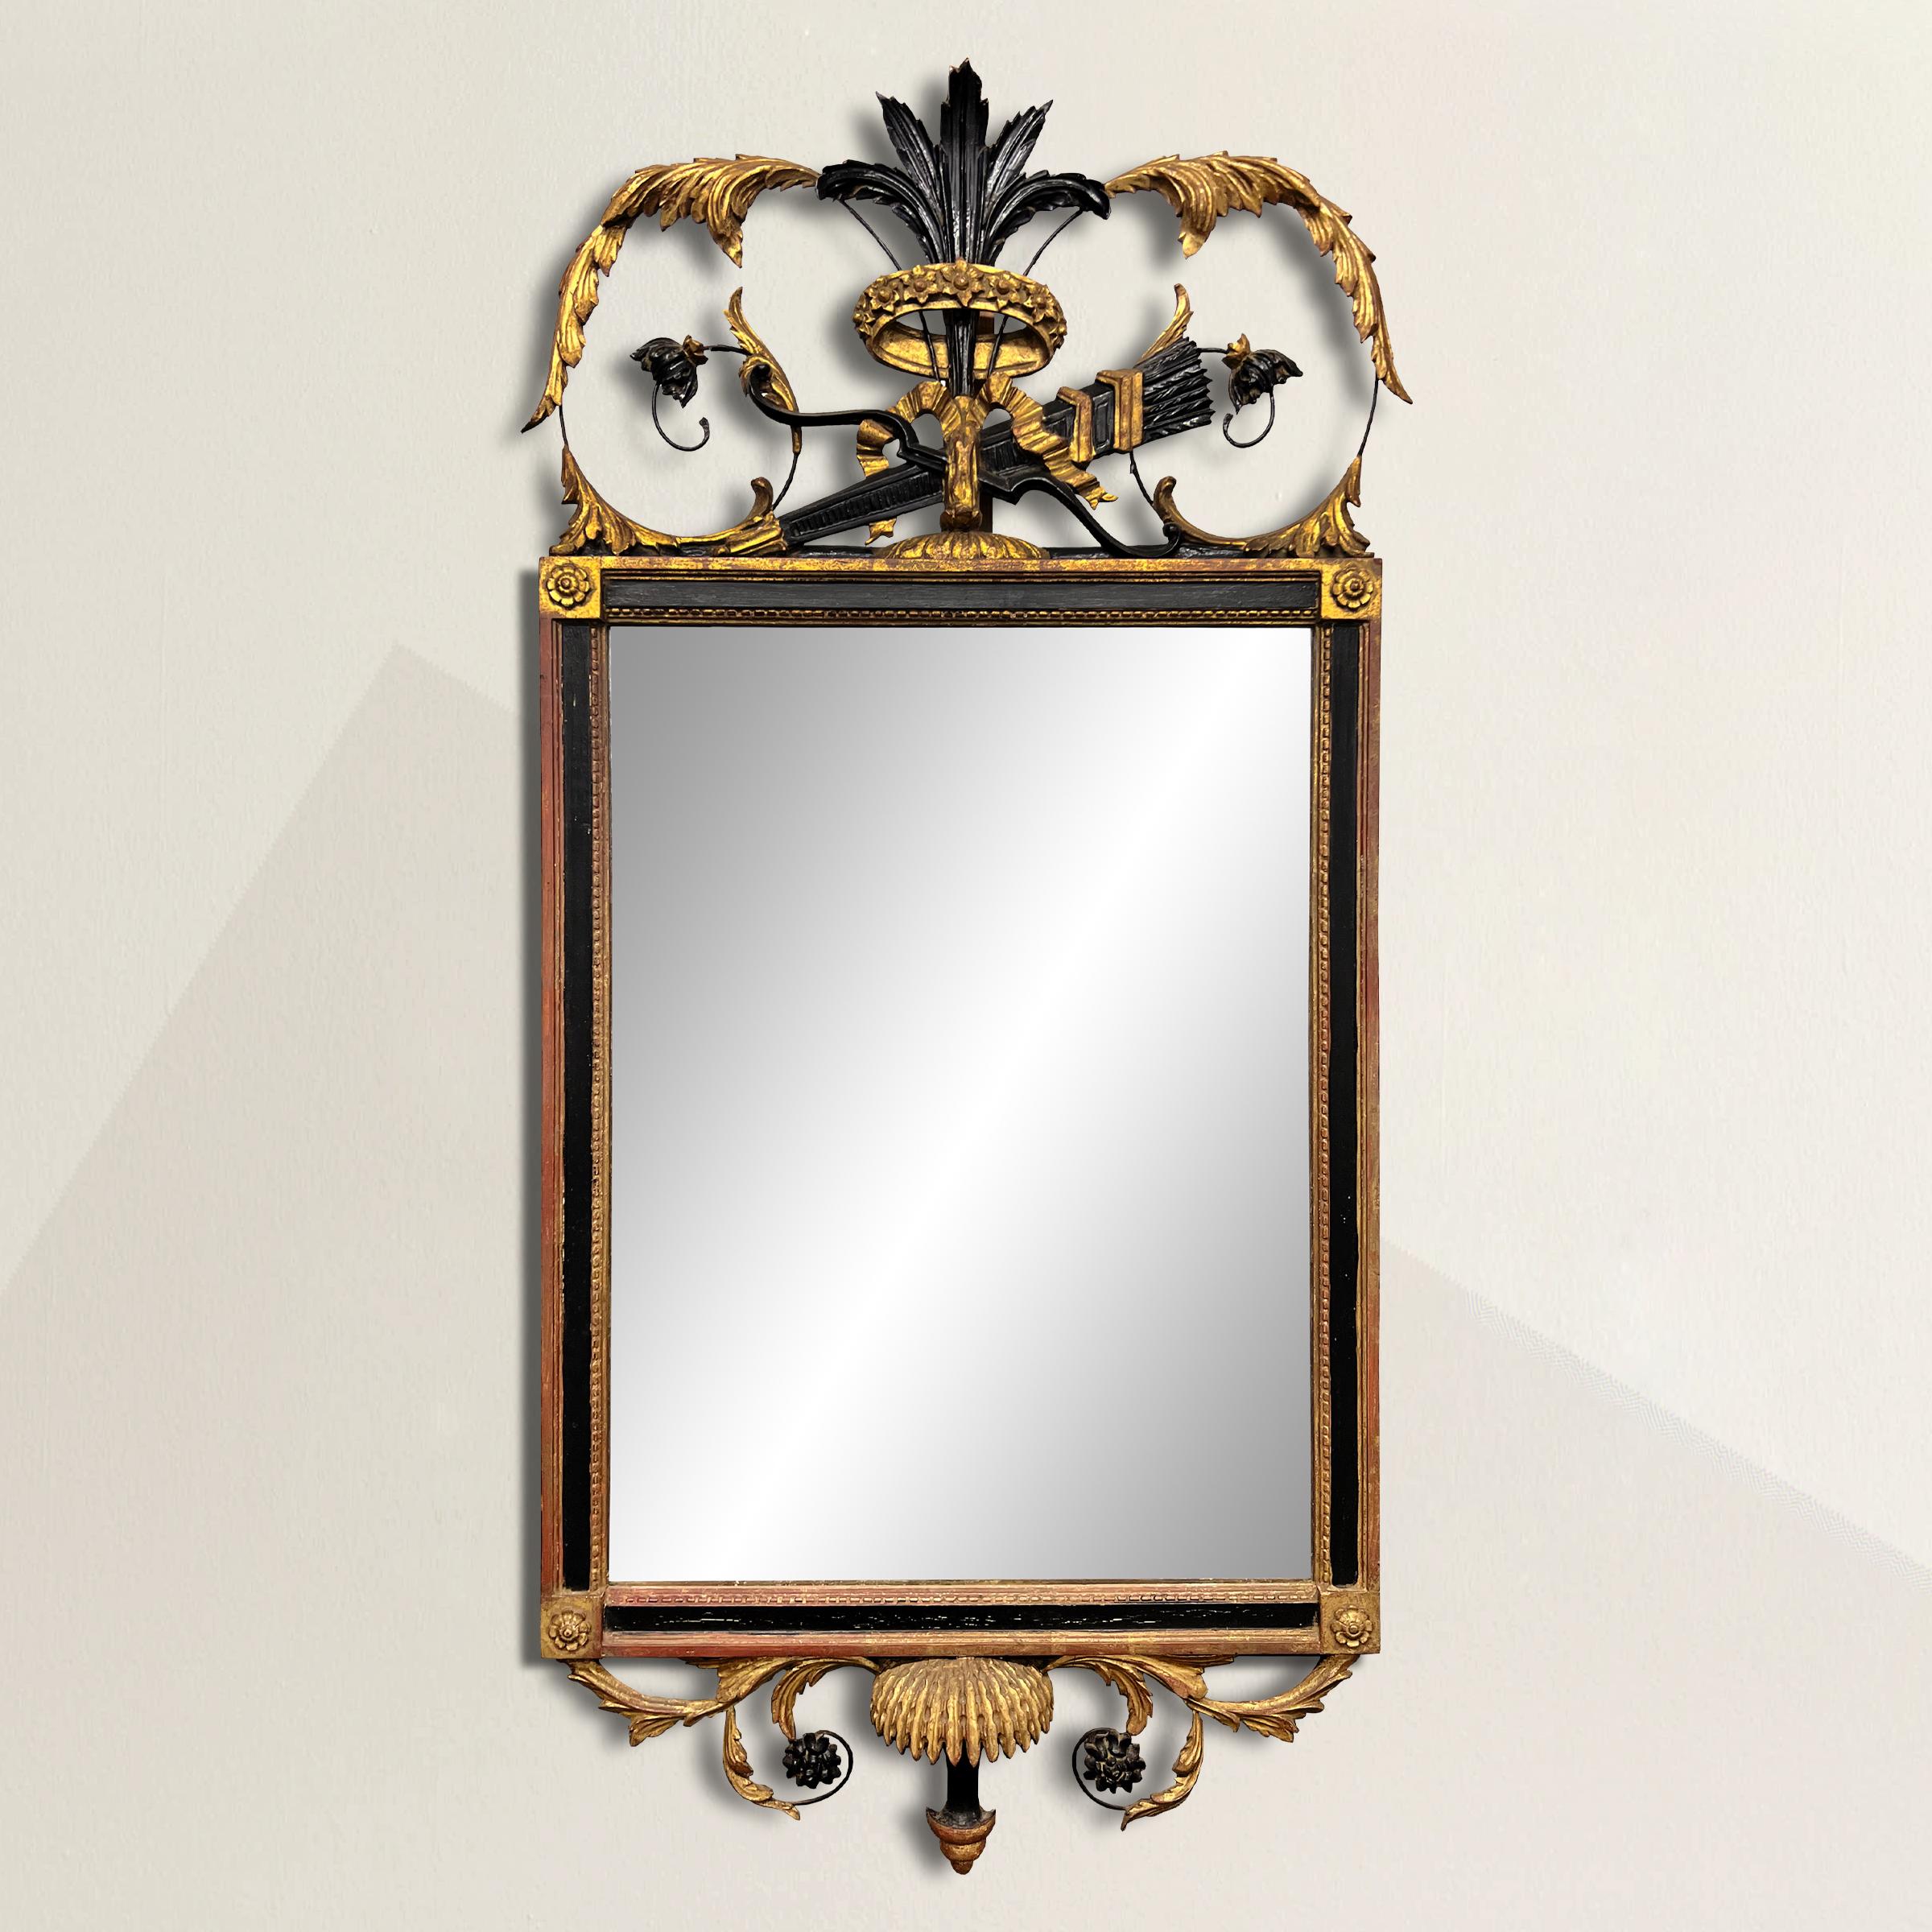 Immerse yourself in the grandeur of the English Georgian period with this captivating 19th-century English Georgian framed mirror. Reflecting the opulence and sophistication of the era, its elaborate crest takes center stage, adorned with a crown